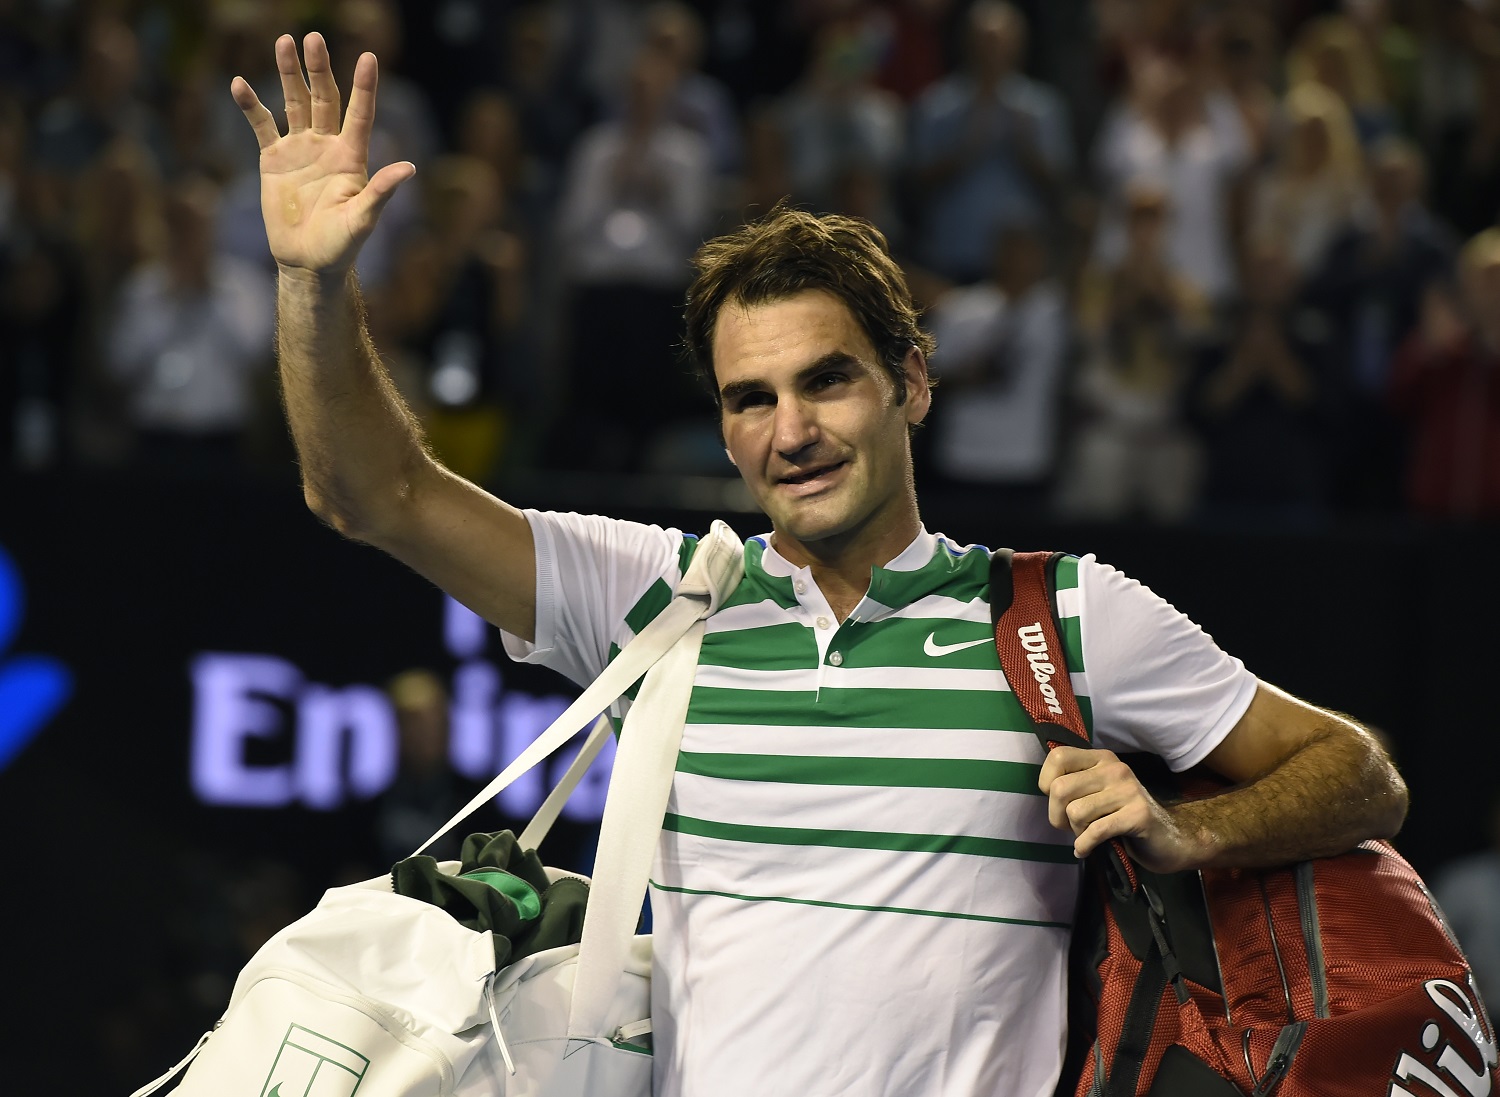 Roger Federer of Switzerland waves as he leaves Rod Laver Arena following his semifinal loss to Novak Djokovic of Serbia at the Australian Open tennis championships in Melbourne, Australia, Thursday, Jan. 28, 2016.(AP Photo/Andrew Brownbill)